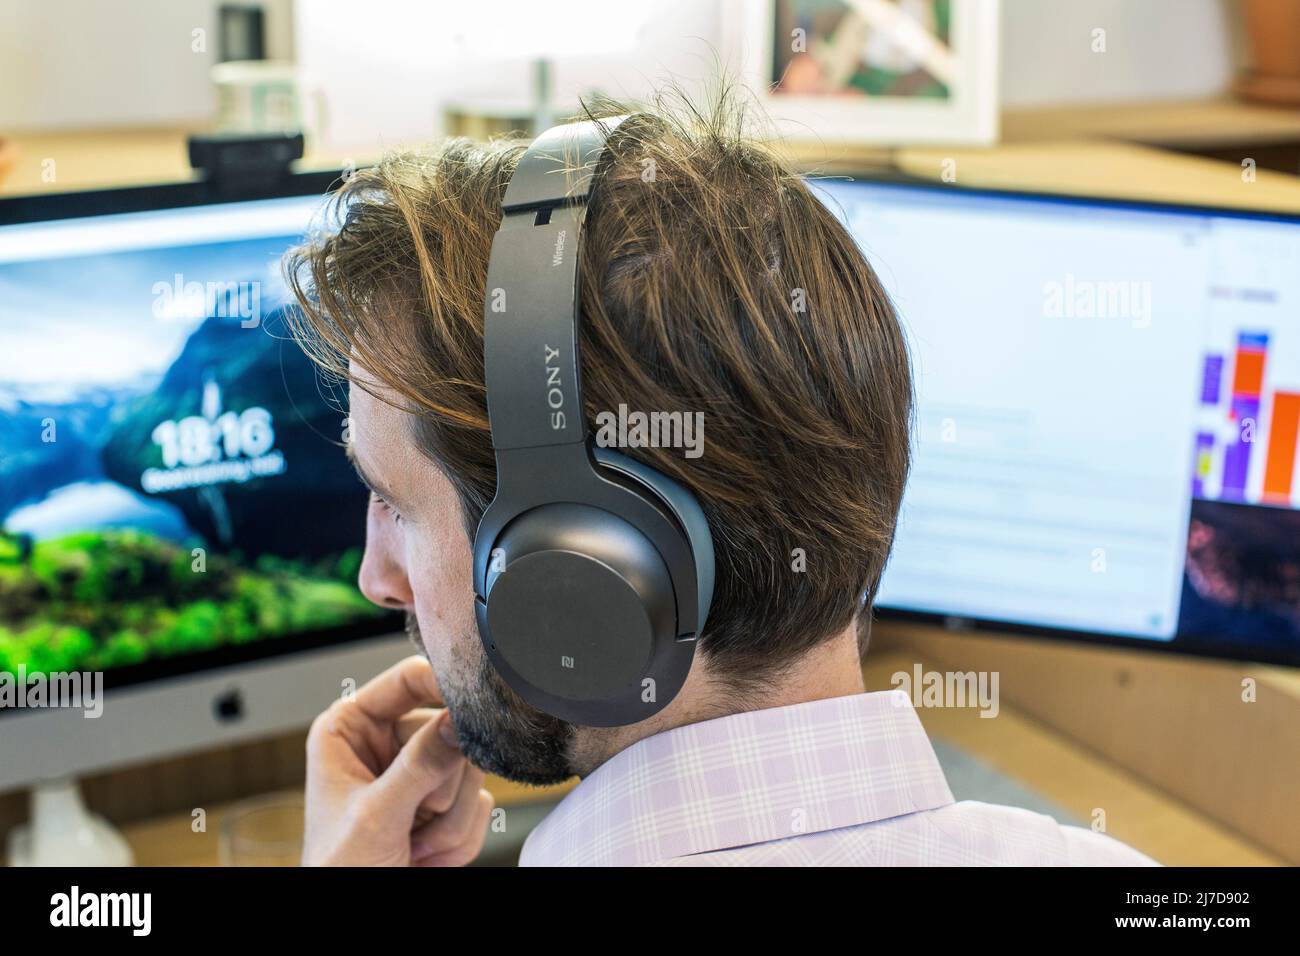 Focused thoughtful man with headphone using computer in a office Stock Photo